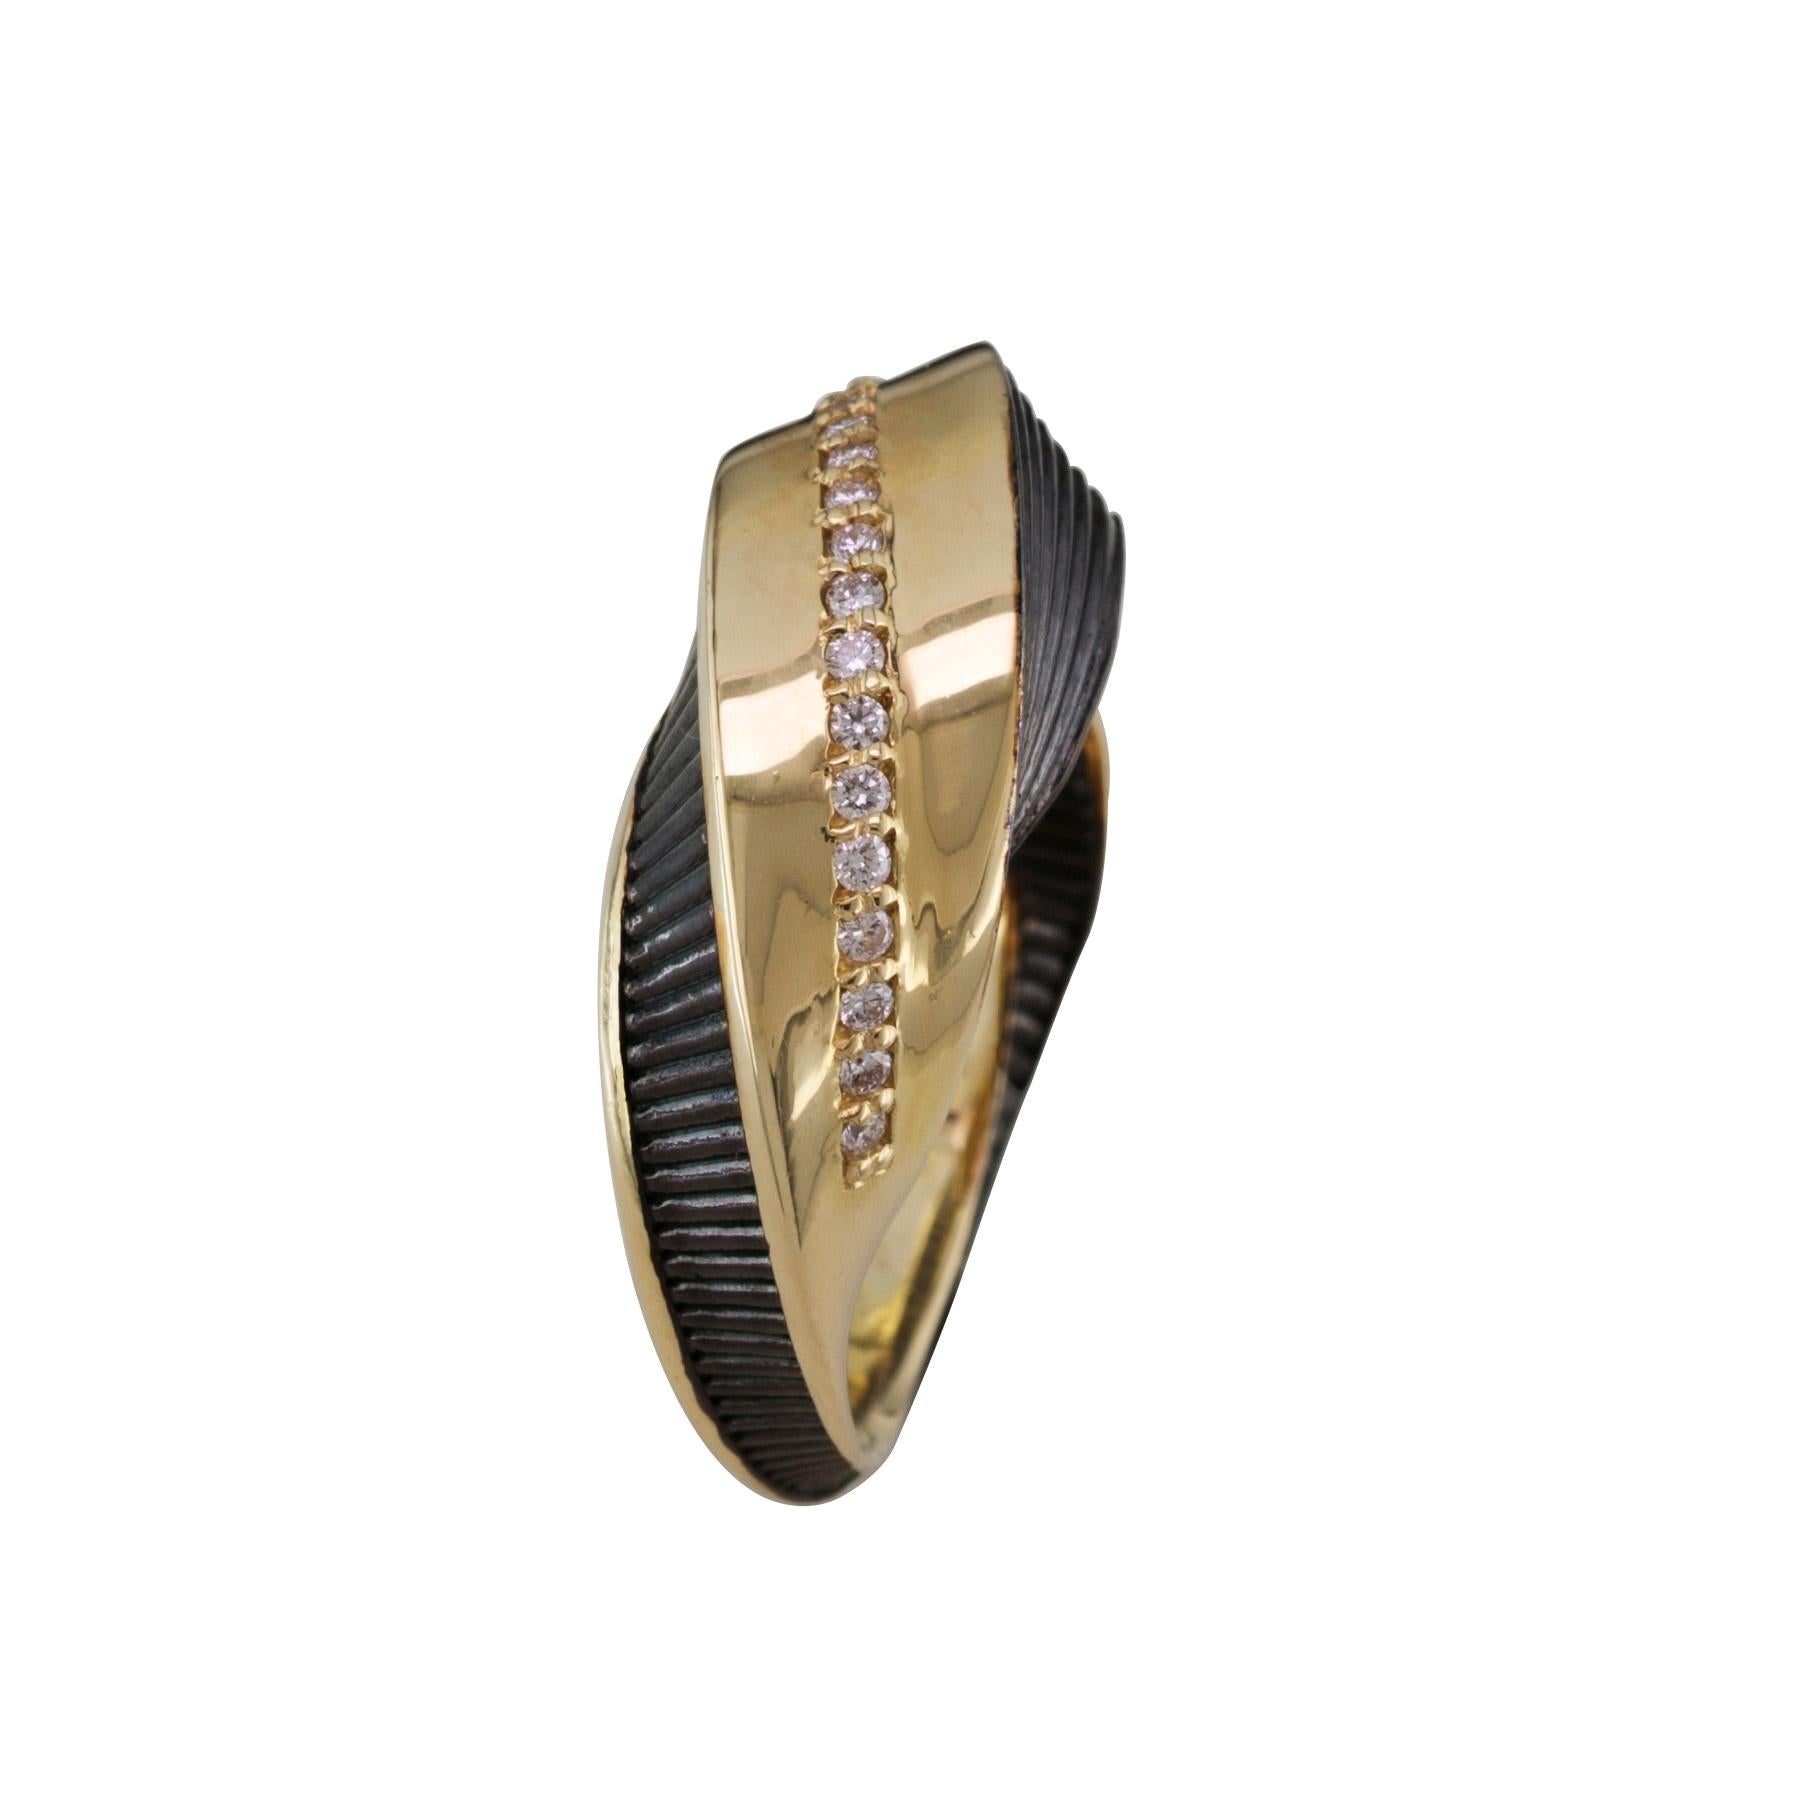 S. Georgios 18 Karat Yellow Gold Diamond Ring which is Designed with Architectural precision. 
The stunning ring is unique as a design and features White Brilliant cut Diamonds total weight of 0,20 Carat and Black Rhodium prongs and a background